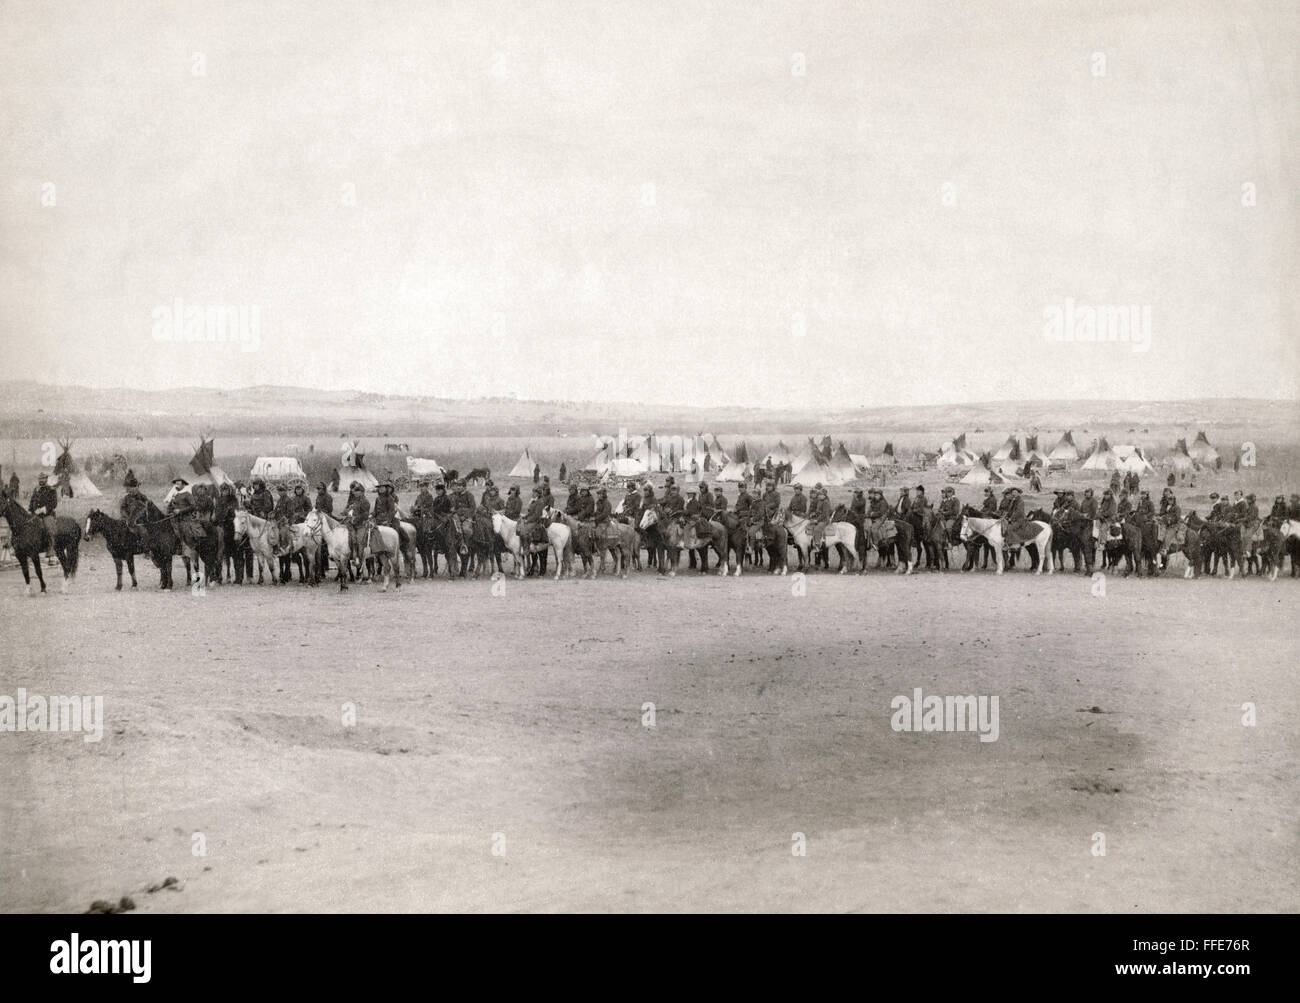 U.S. ARMY SCOUTS, 1891. /nA long row of U.S. military men and Lakota Sioux scouts on horseback in front of a tipi camp. Photographed in 1891 by John C.H. Grabill, probably on or near the Pine Ridge Reservation in South Dakota. Stock Photo